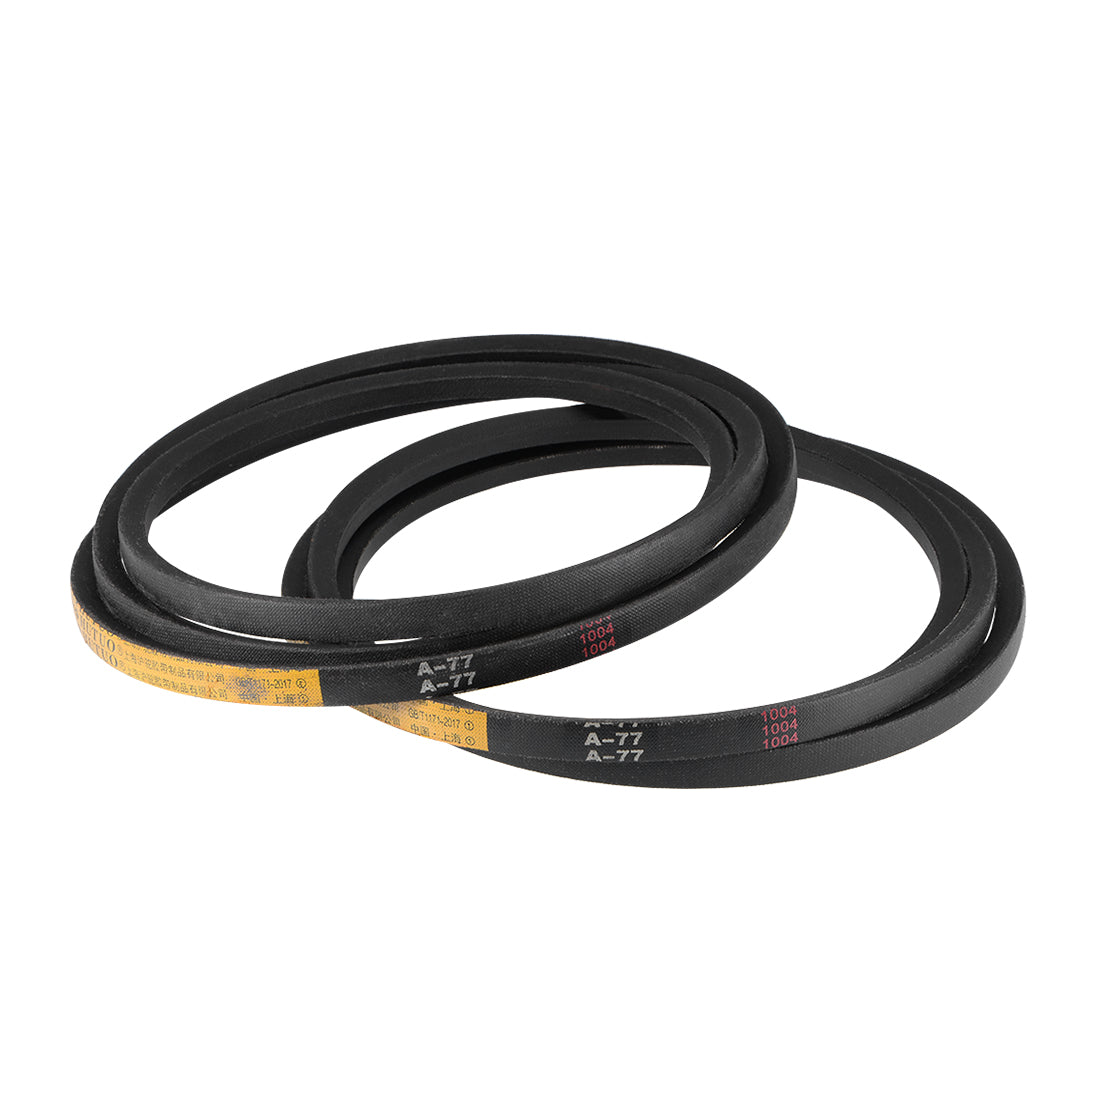 uxcell Uxcell V-Belts Pitch Length, A-Section Rubber Drive Belt